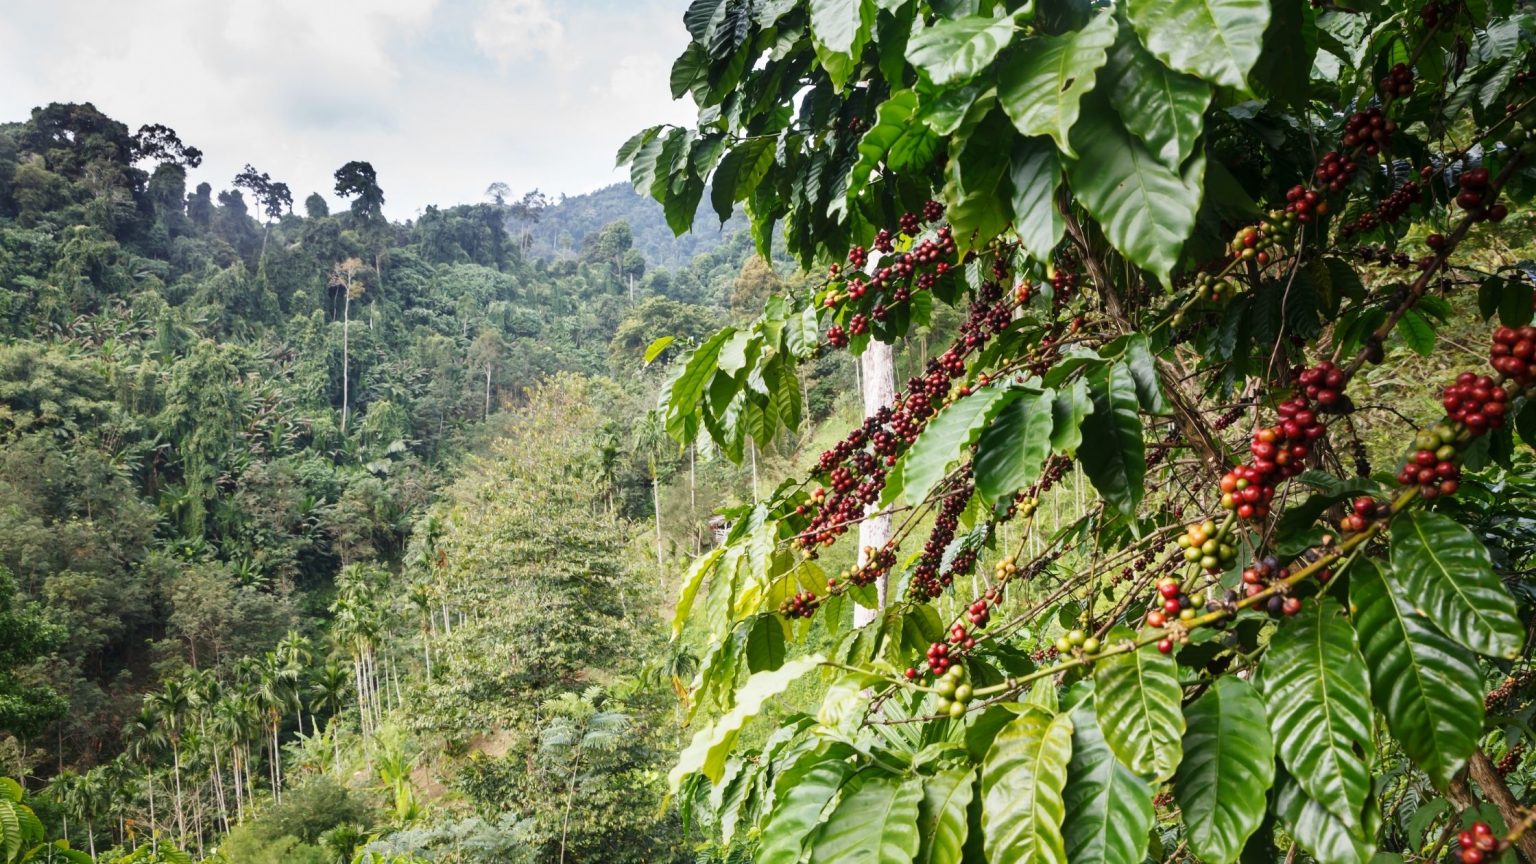 Green Coffee production